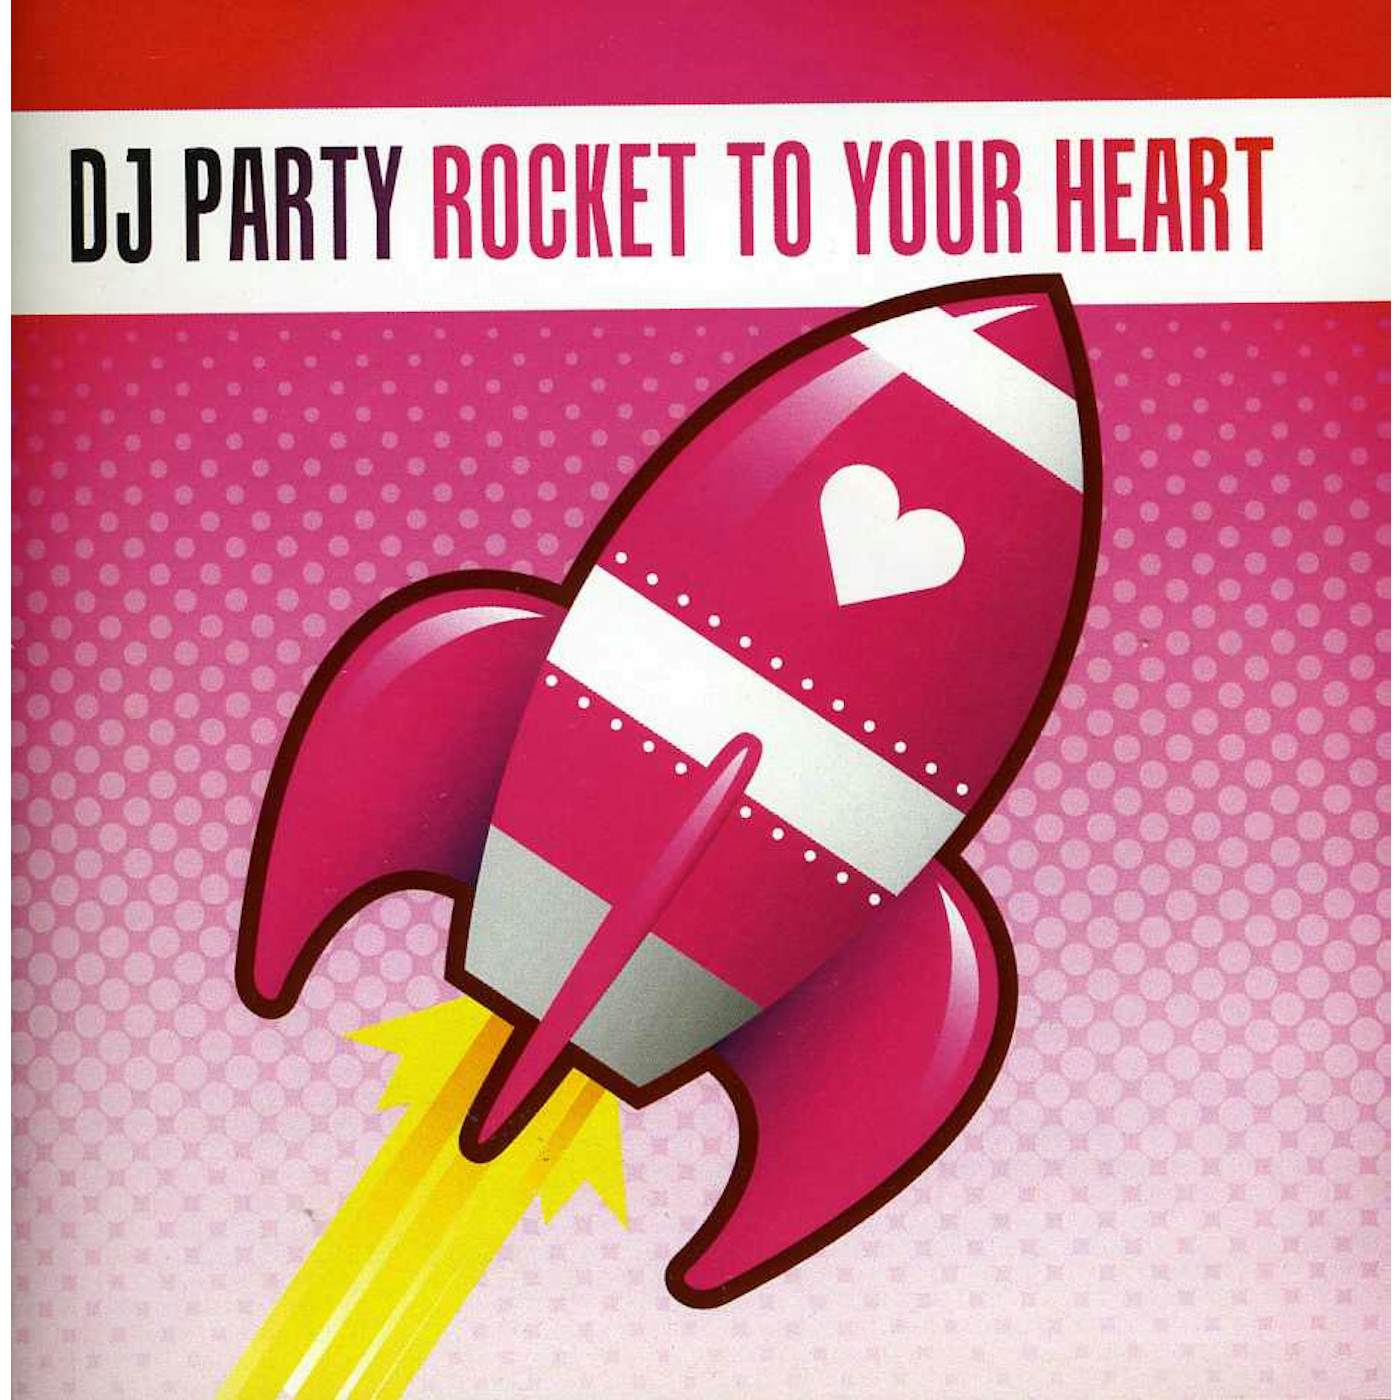 DJ Party ROCKET TO YOUR HEART CD